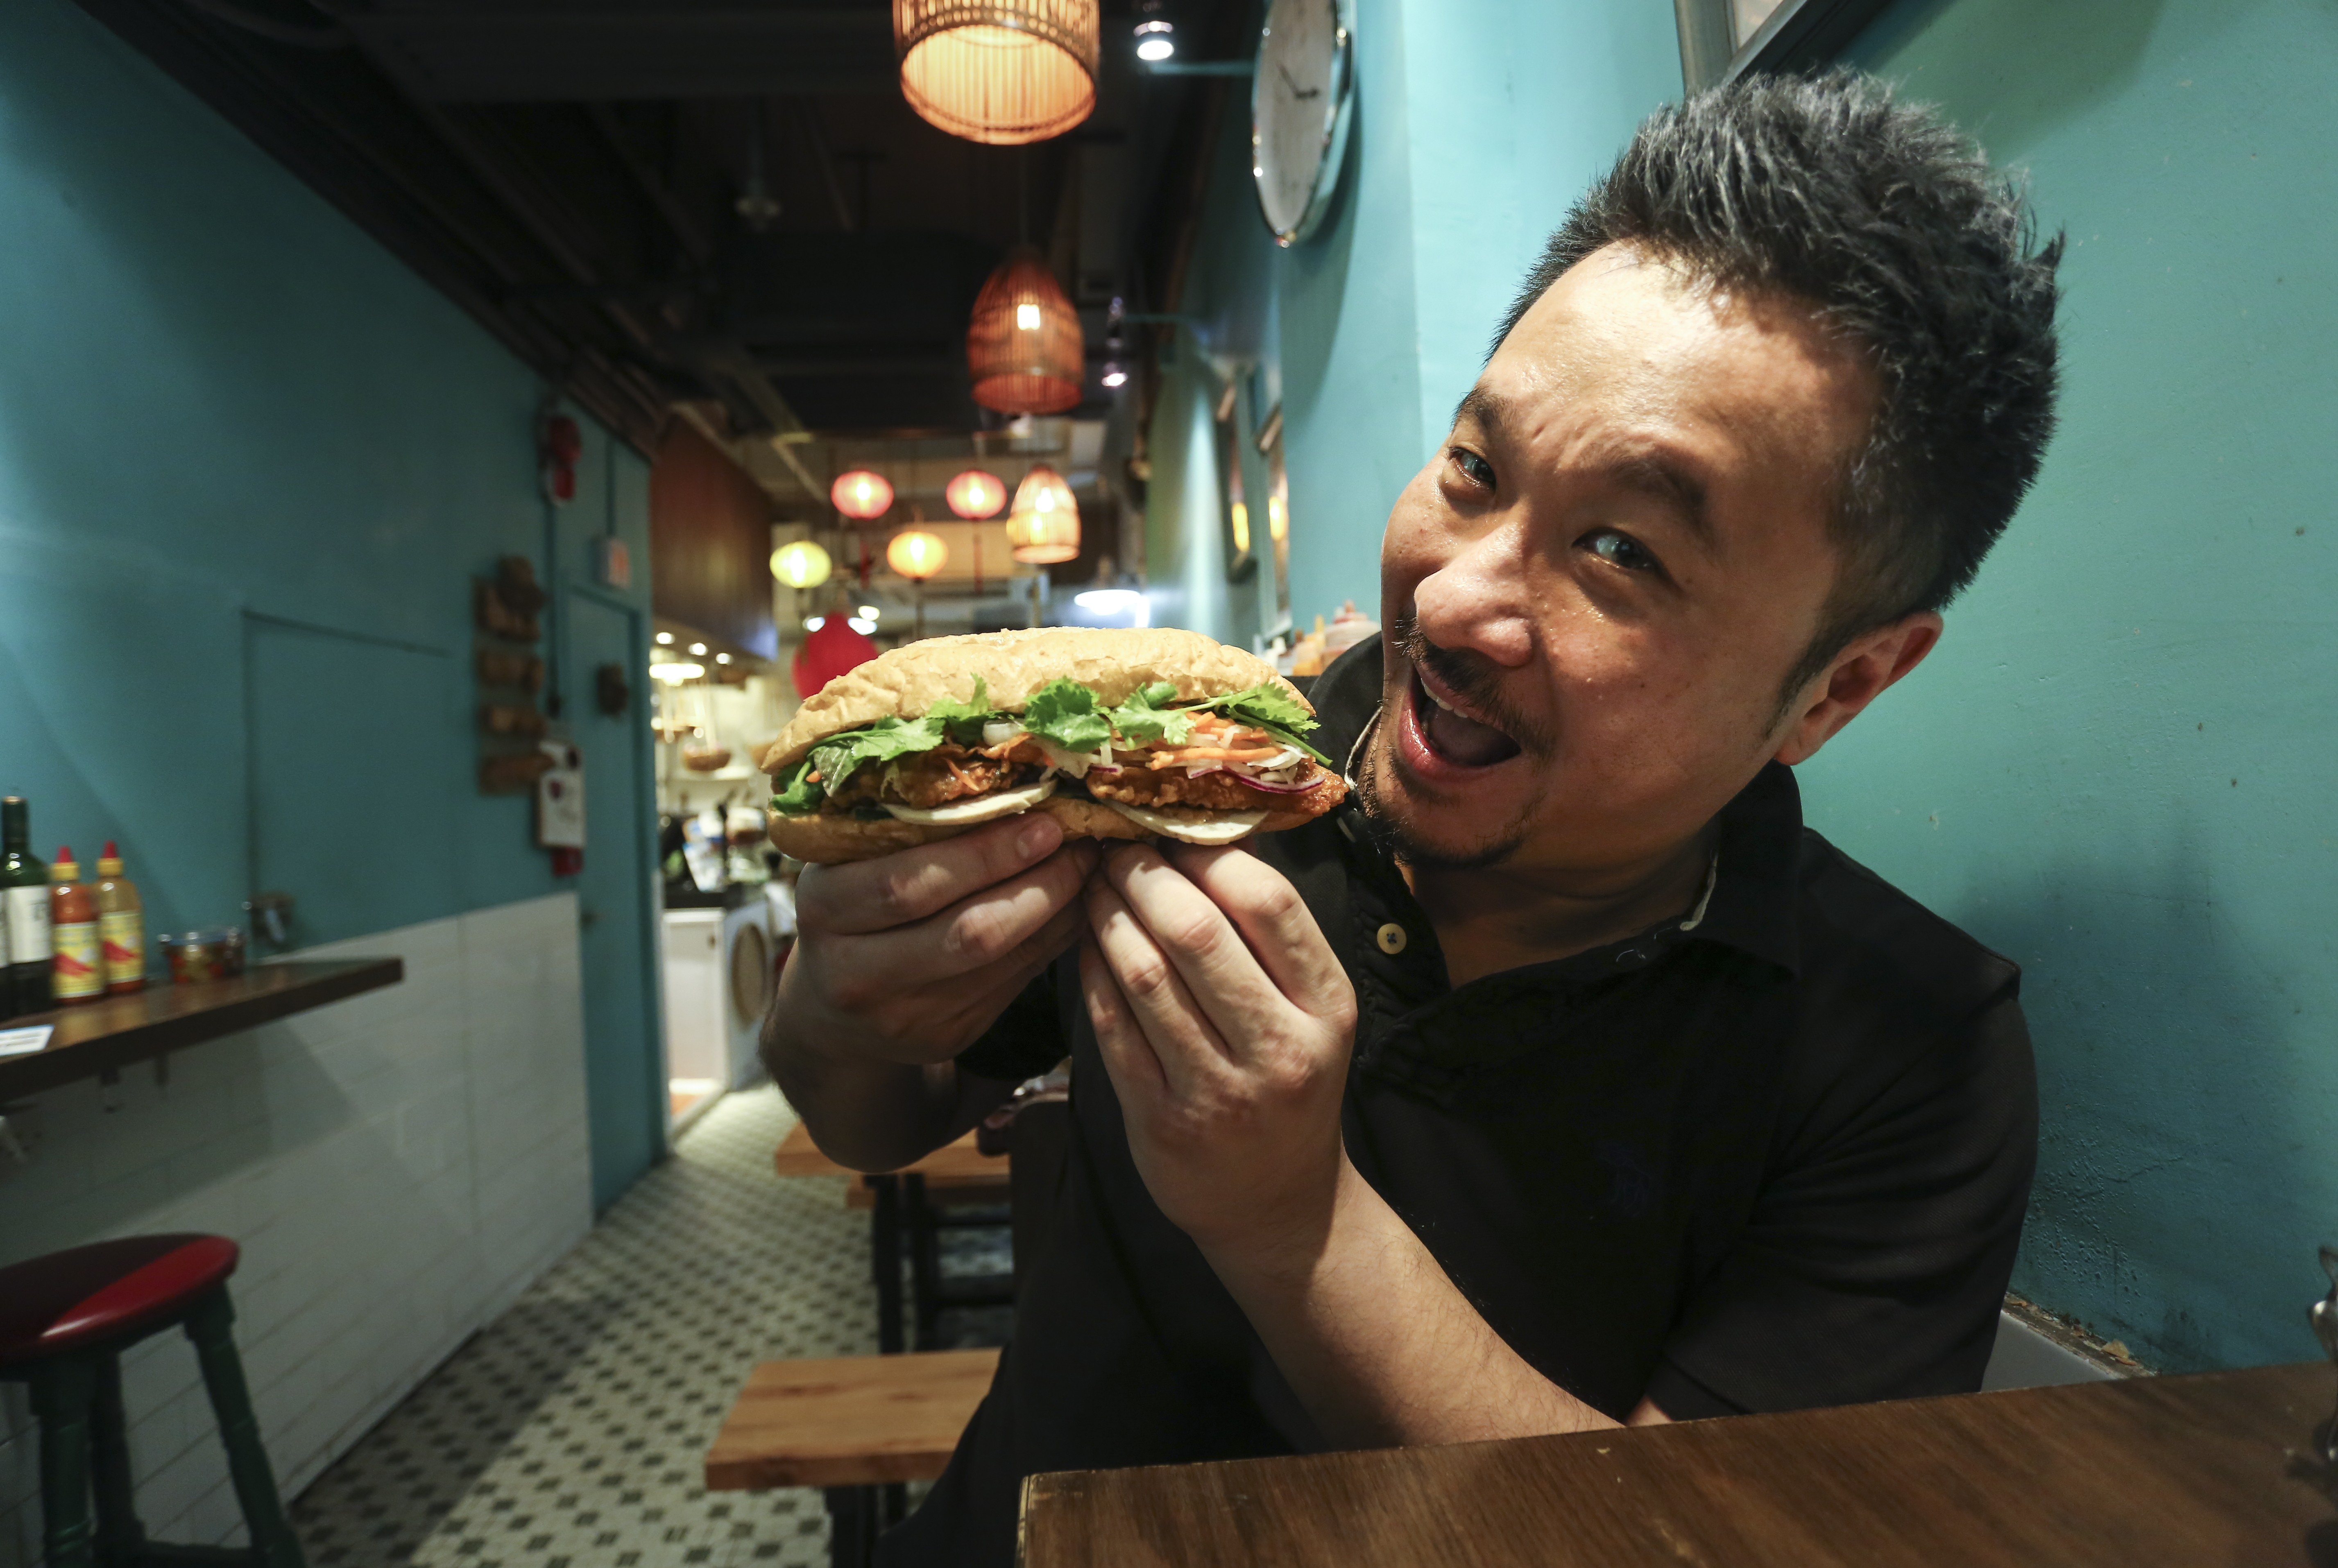 Vietnamese bakers took the French baguette, adapted it to the humid southeast Asian climate, and filled it with local flavours. For Hong Kong’s burgeoning banh mi brigade, success is all about the quality of the bread